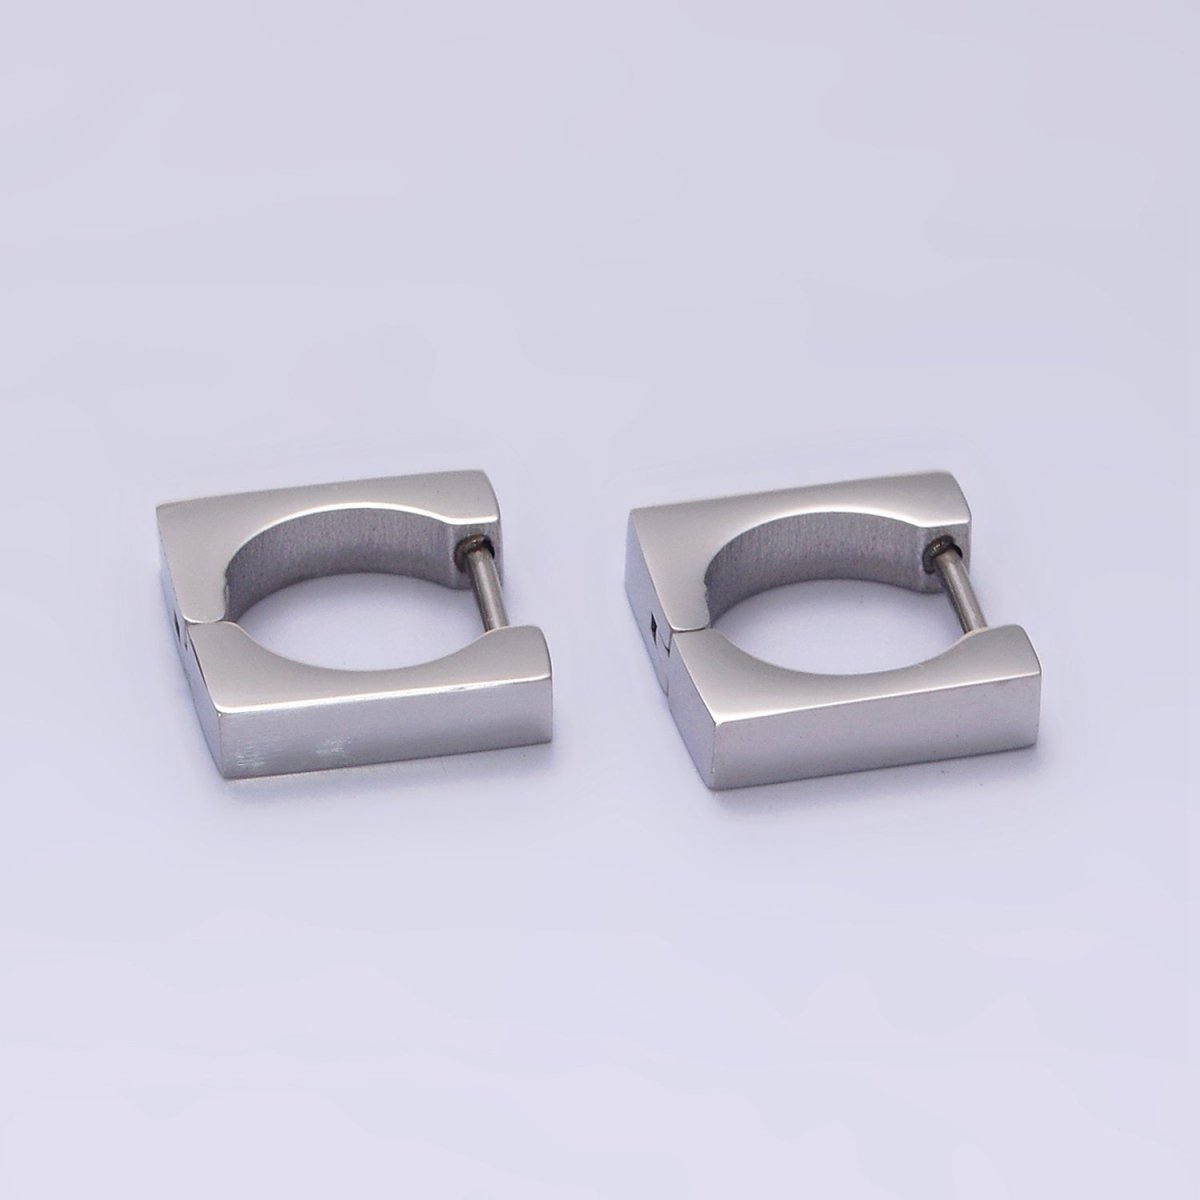 Stainless Steel 11mm Flat Square Cartilage Huggie Earrings in Gold & Silver | V193 V194 - DLUXCA